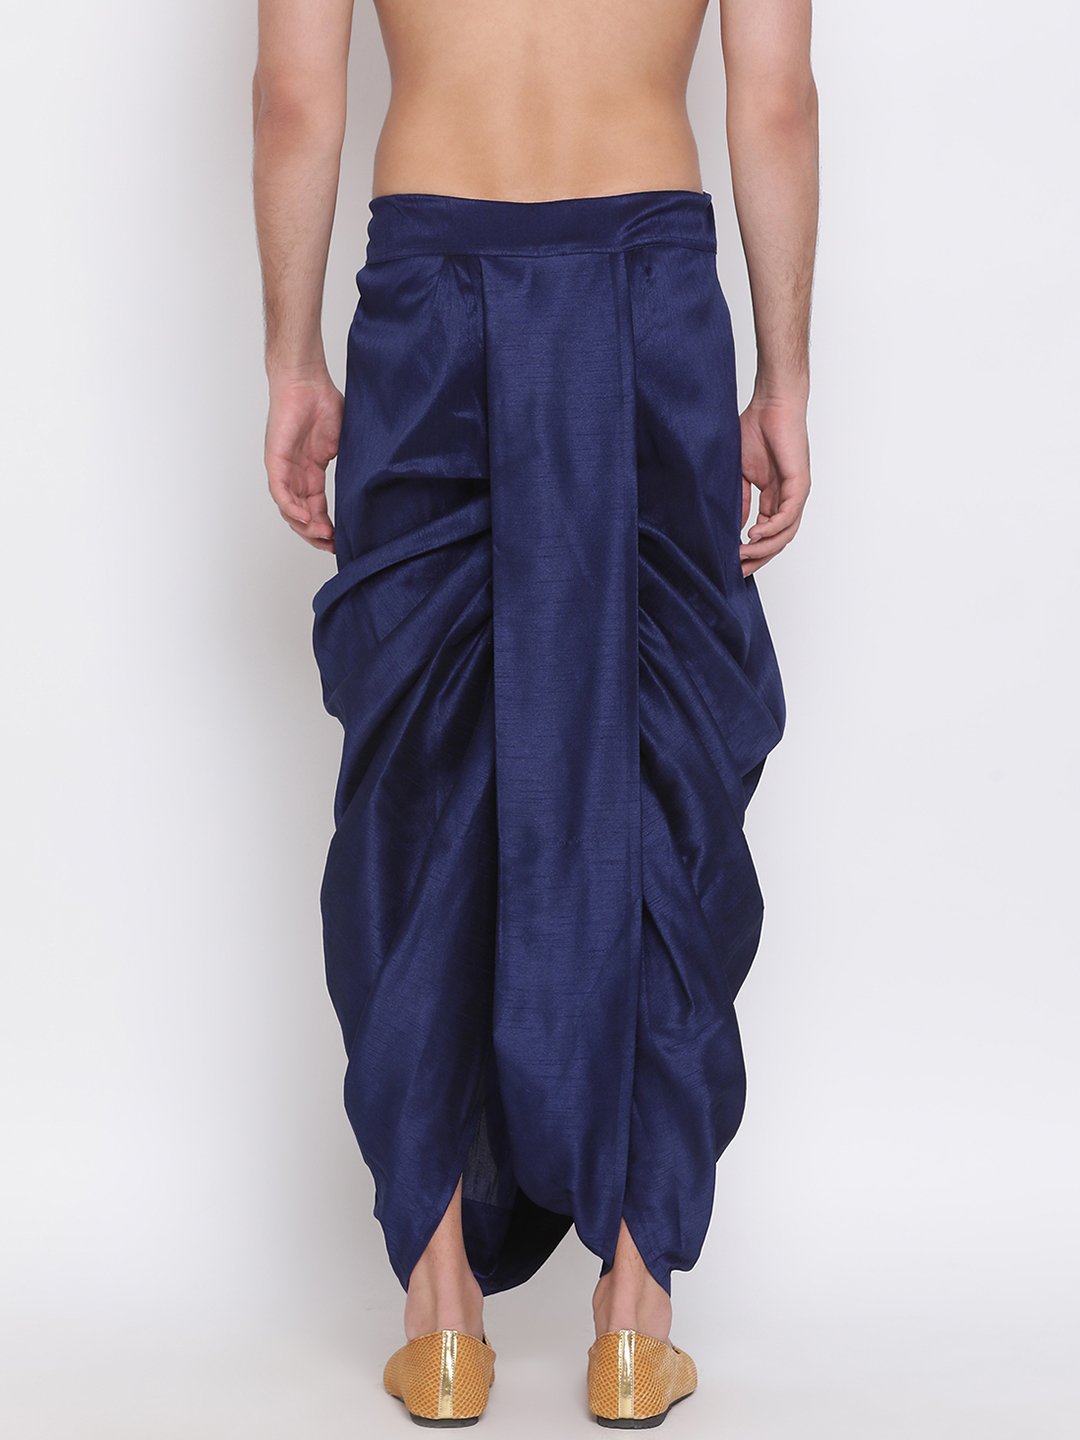 Men's Navy Blue Embroidered Dhoti Pant - Vastramay